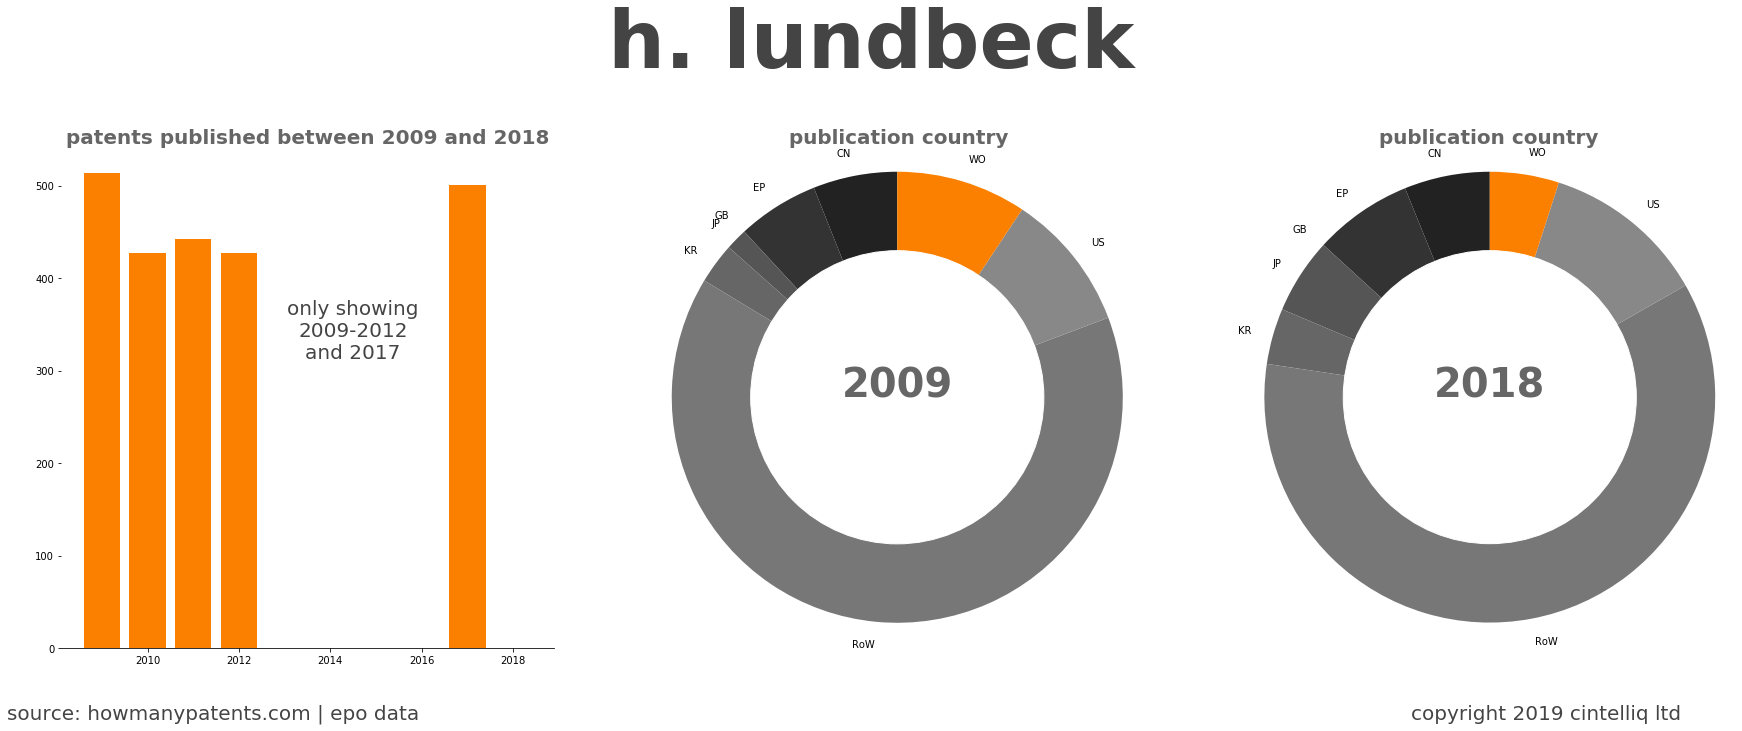 summary of patents for H. Lundbeck